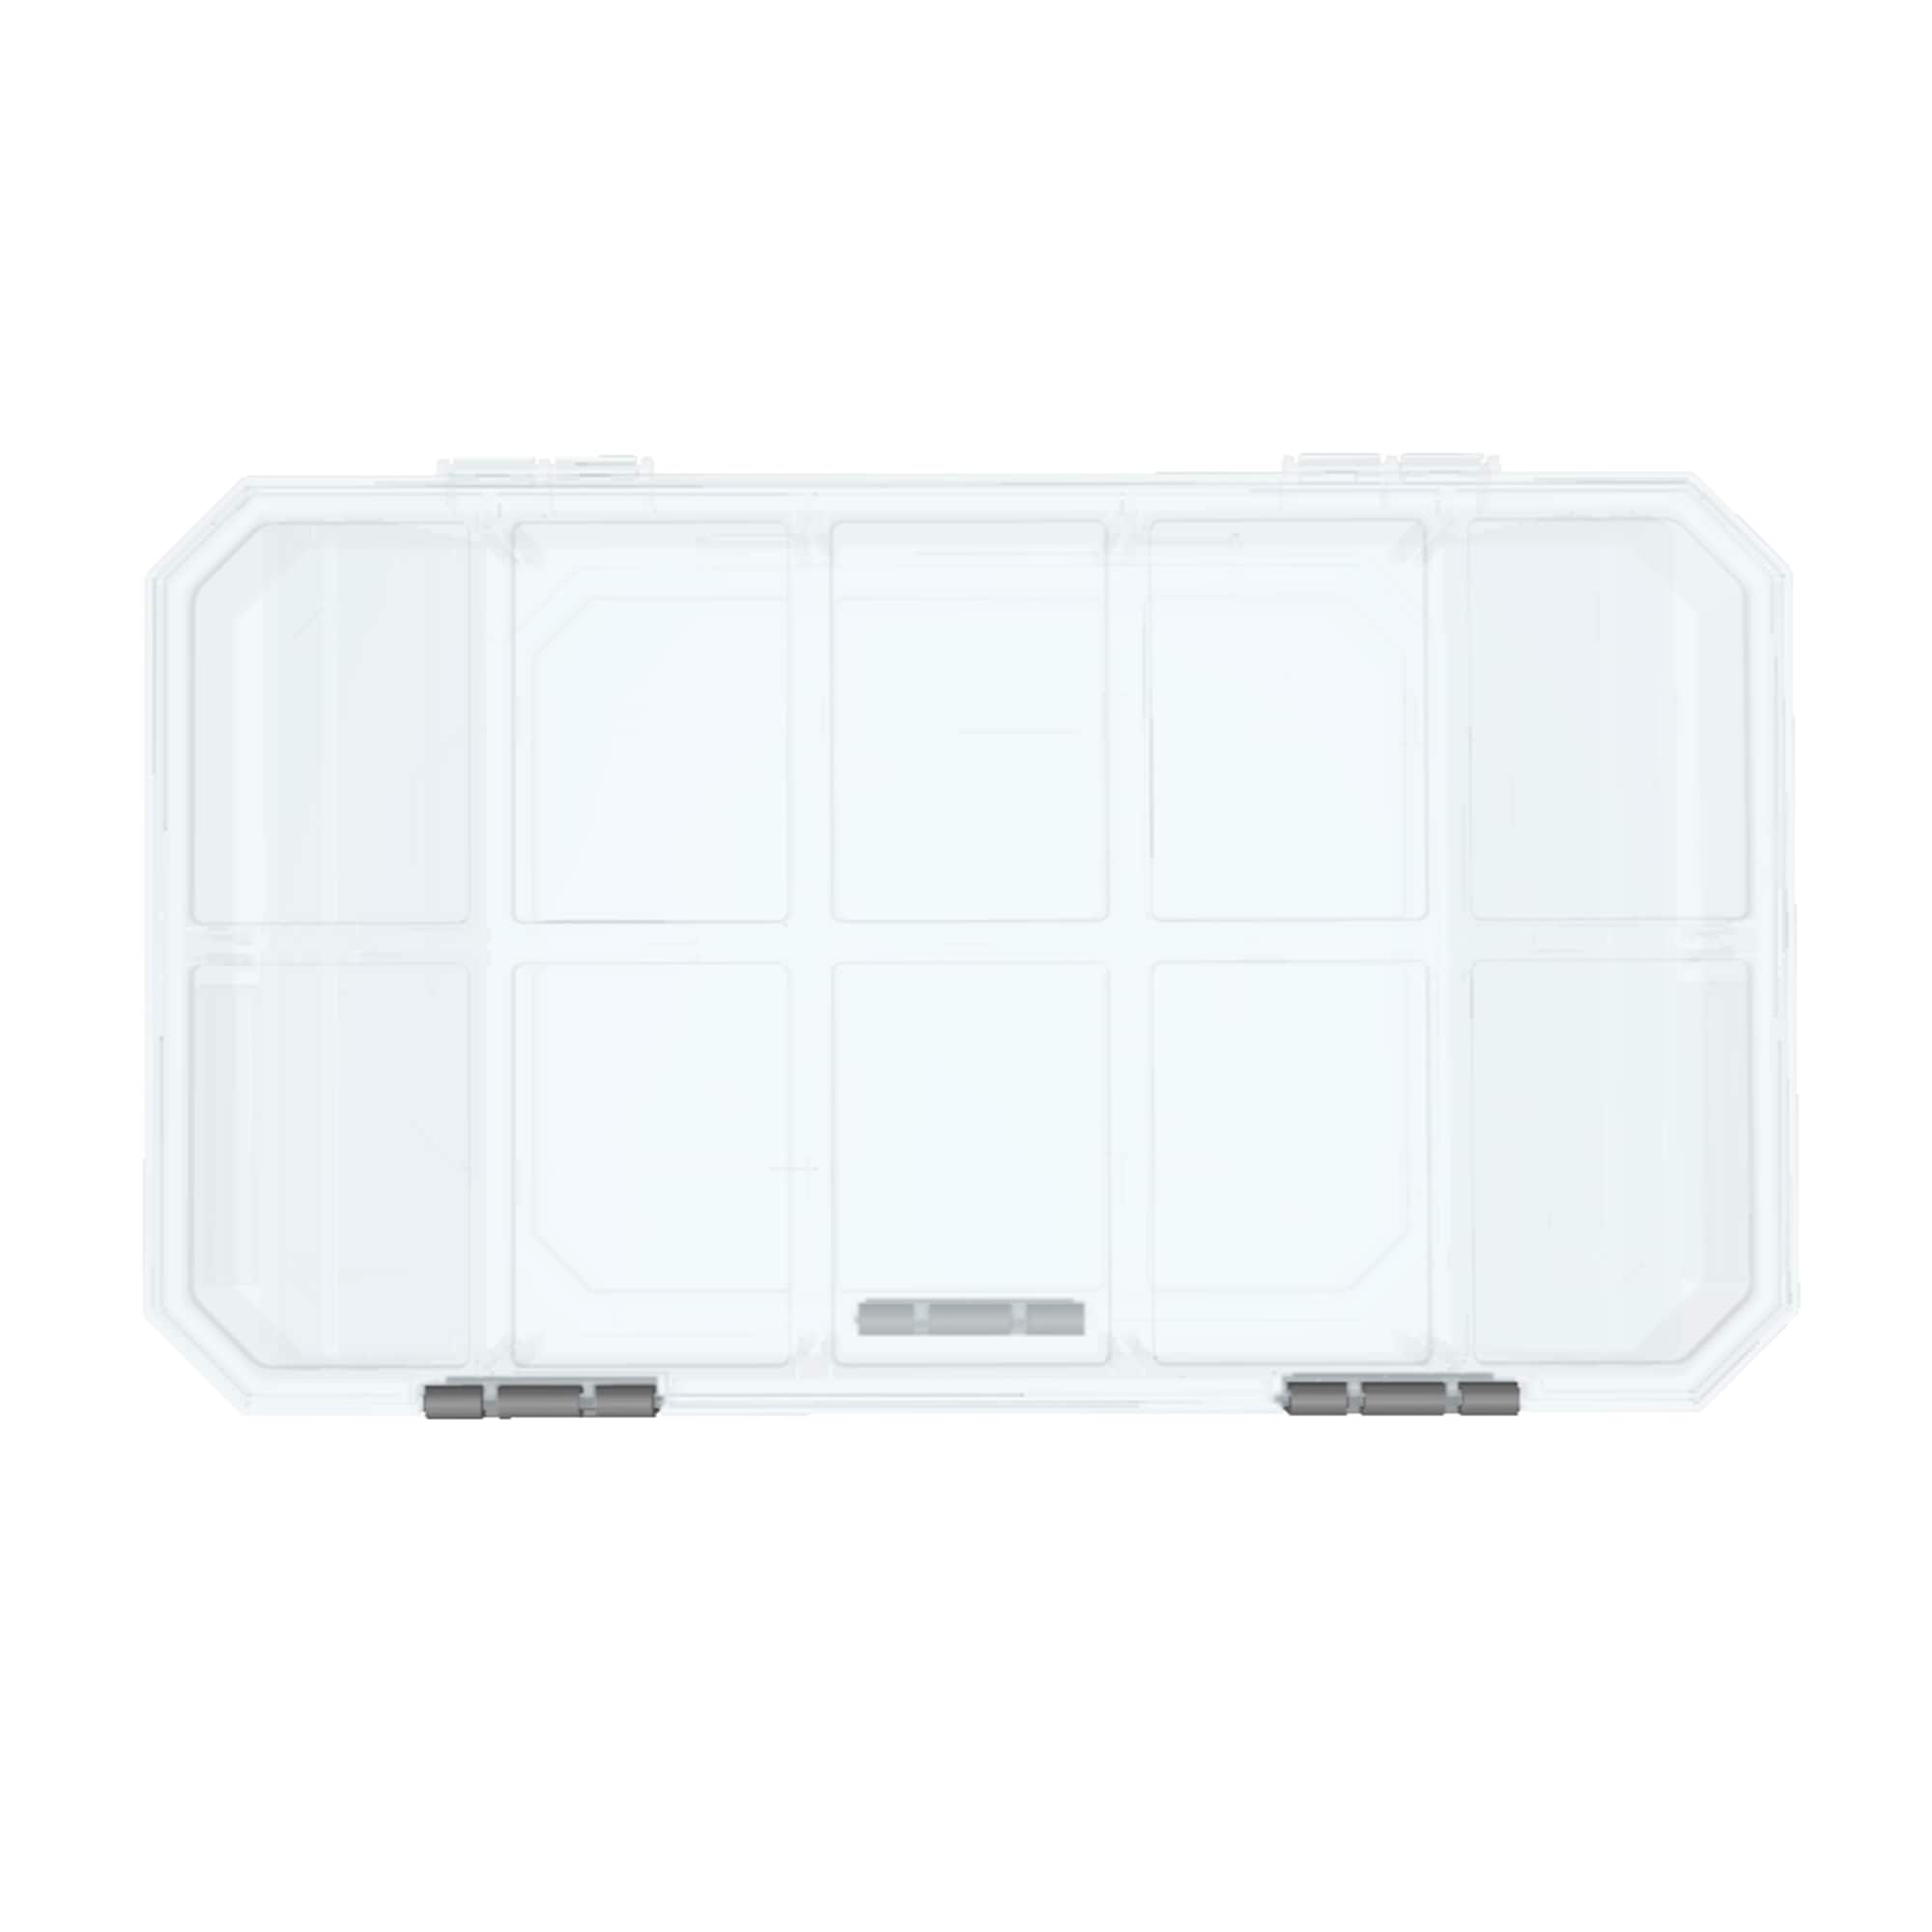 12 Inch Wide Small Parts Organizers at